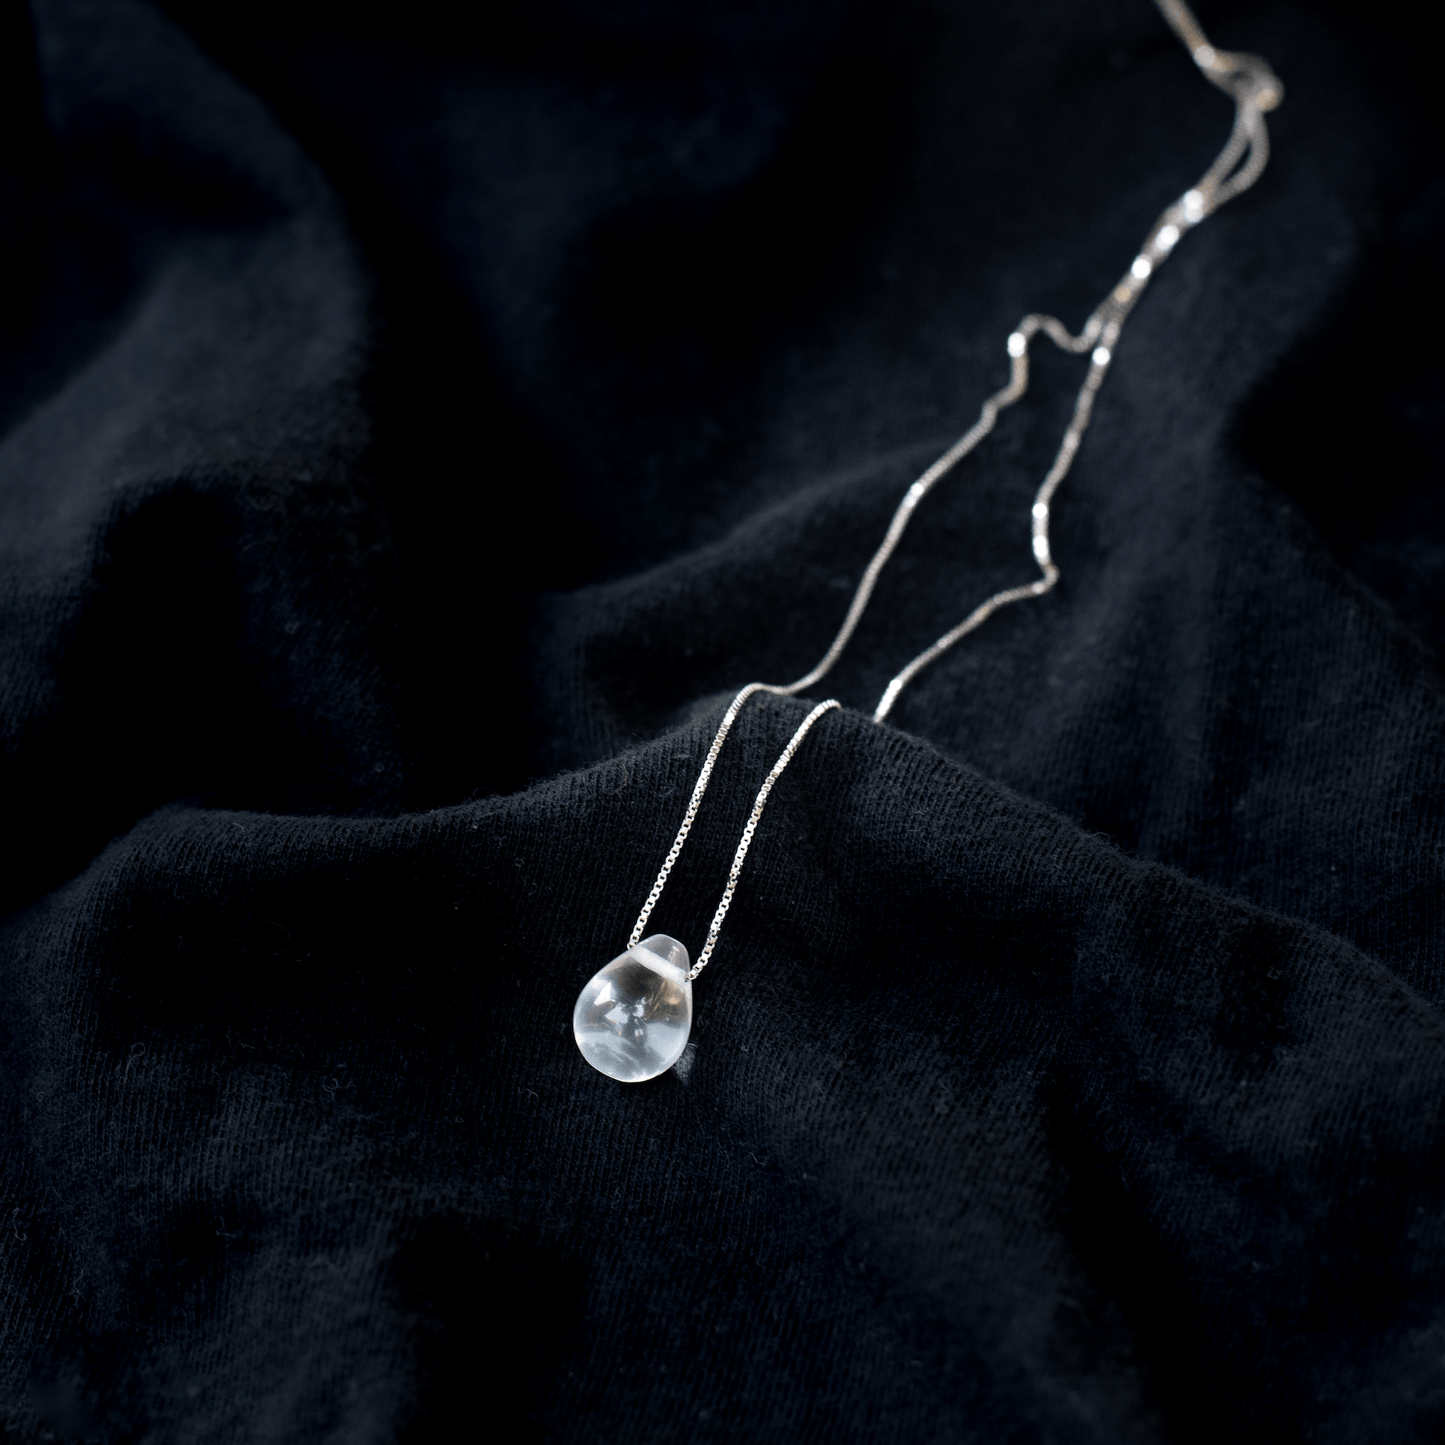 Water Drop Sterling Silver Necklace Wear The Peace Necklaces Silver